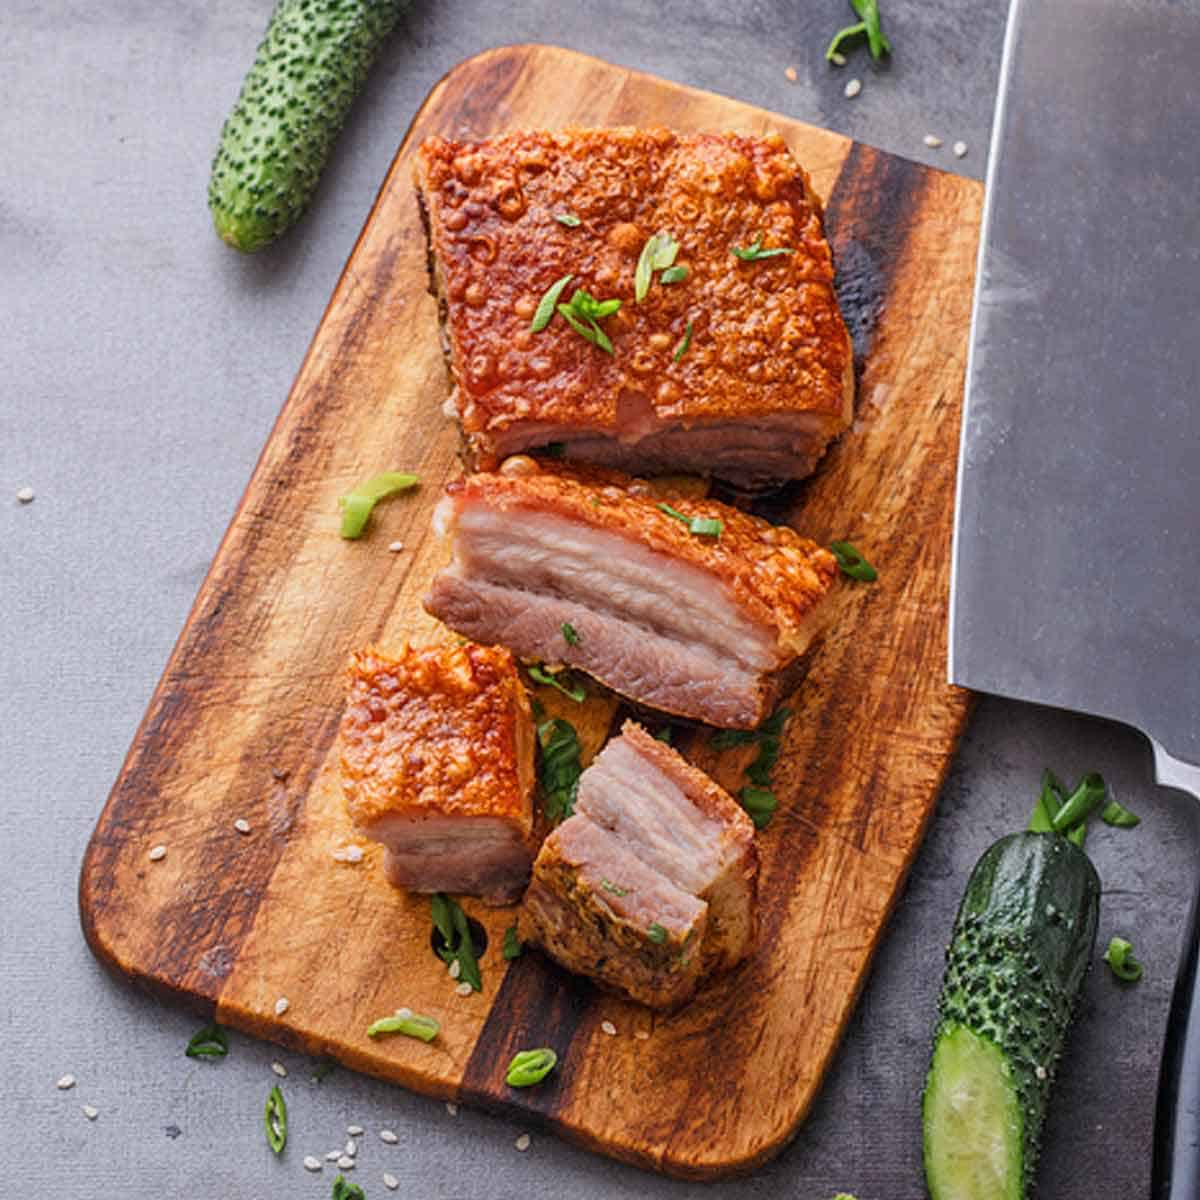 Chinese pork belly and a cleaver on a cutting board.